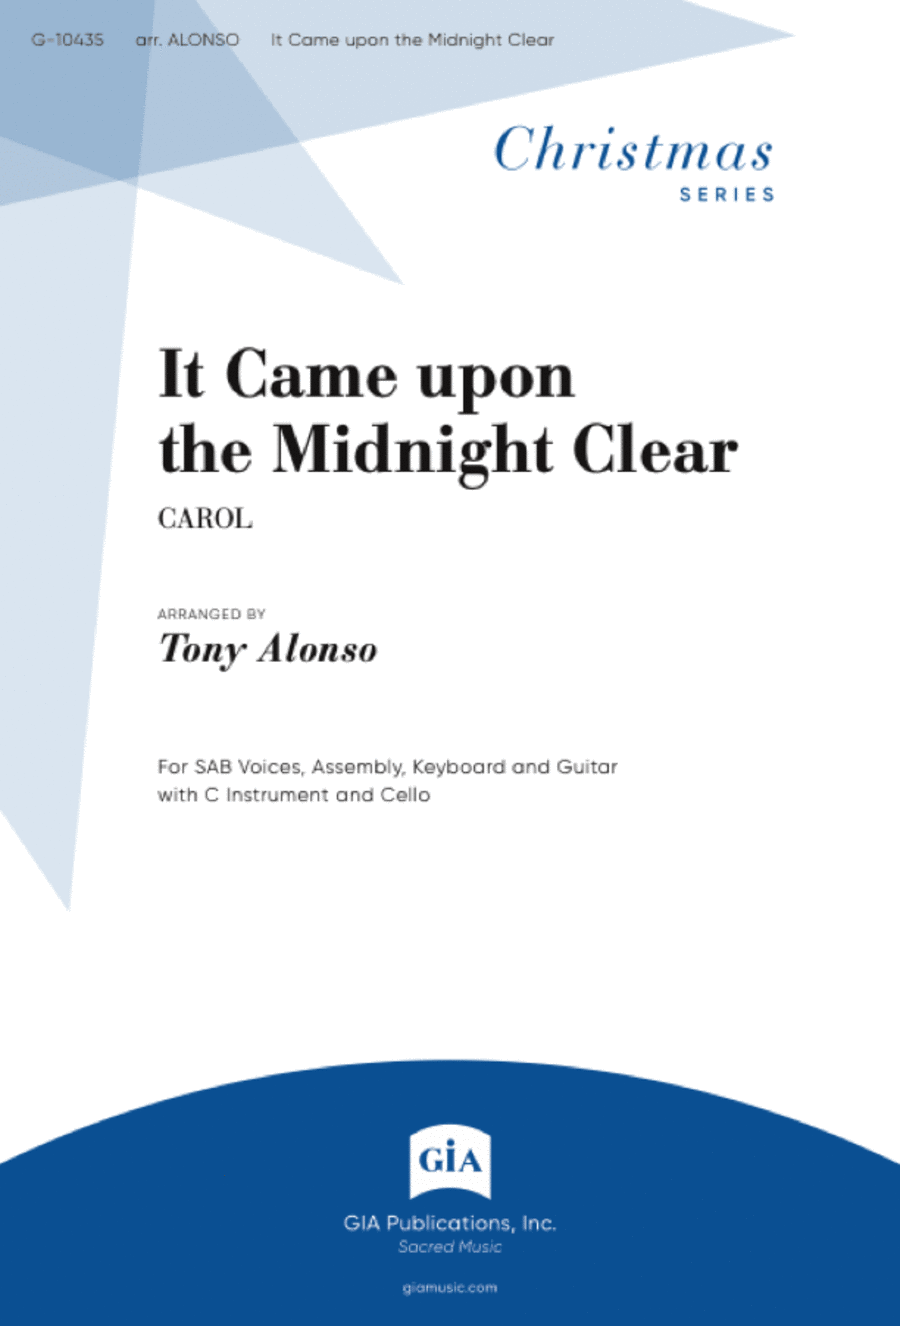 It Came upon the Midnight Clear